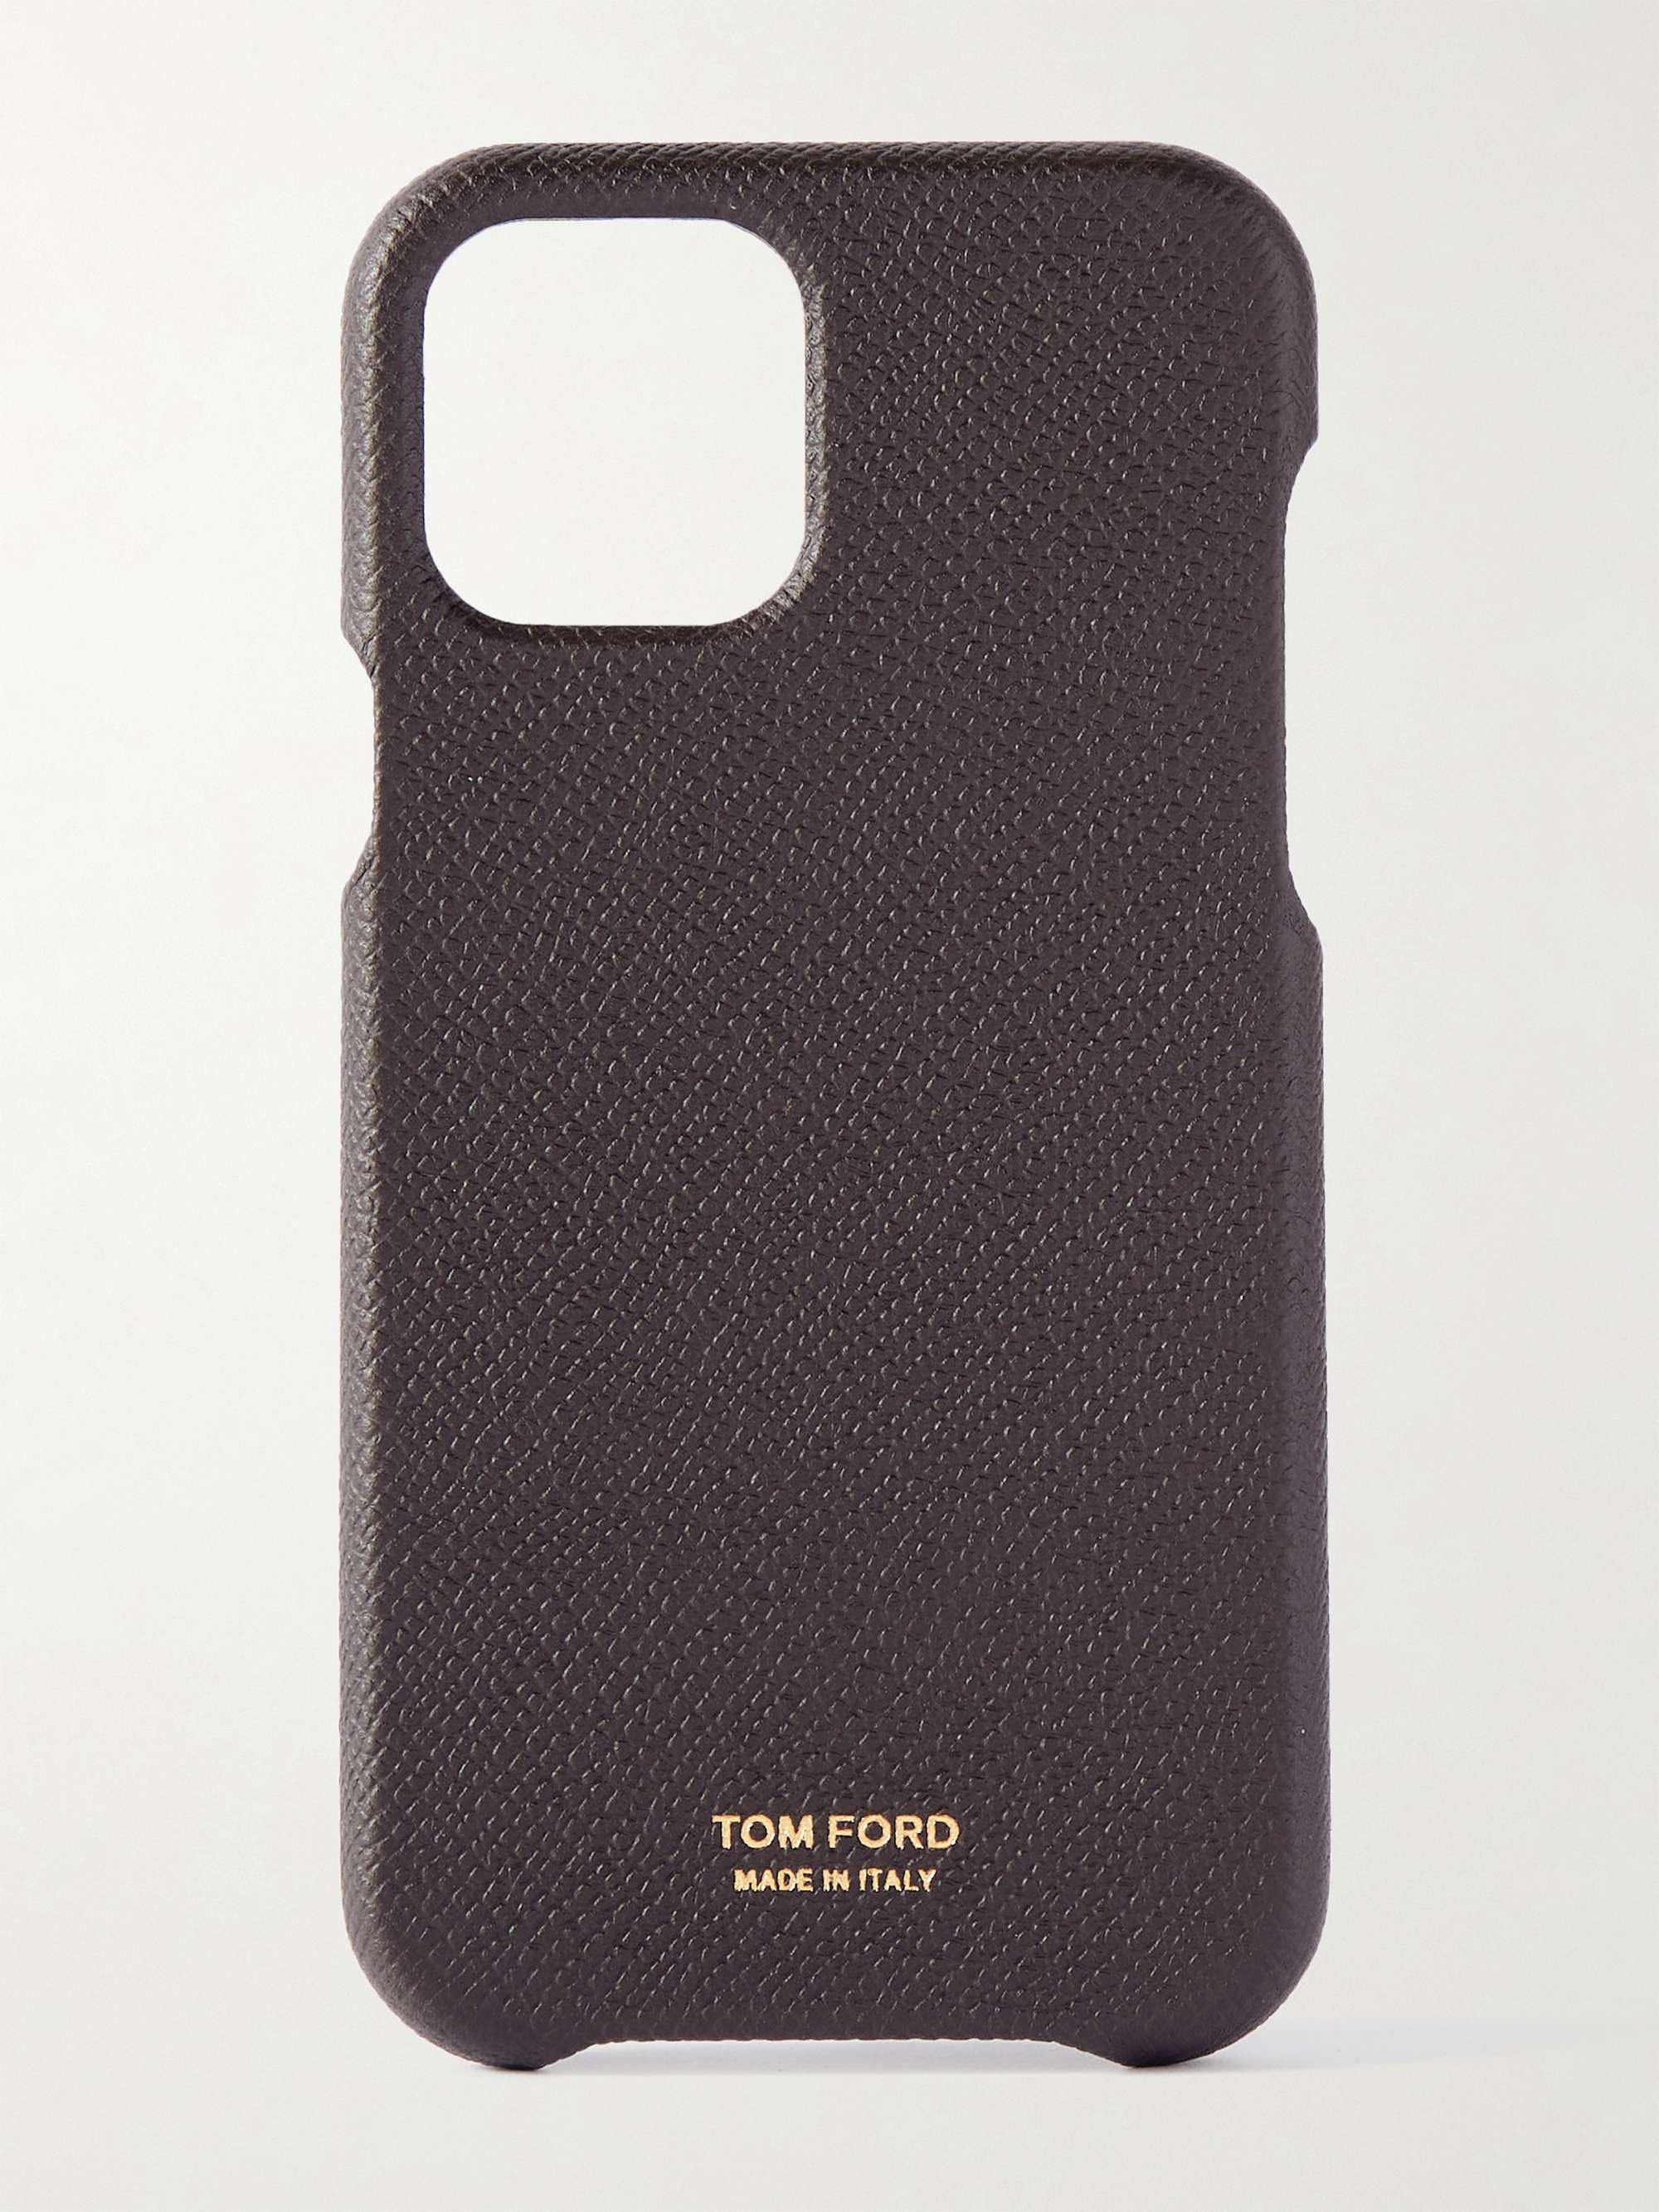 TOM FORD Full-Grain Leather iPhone 12 Pro Case